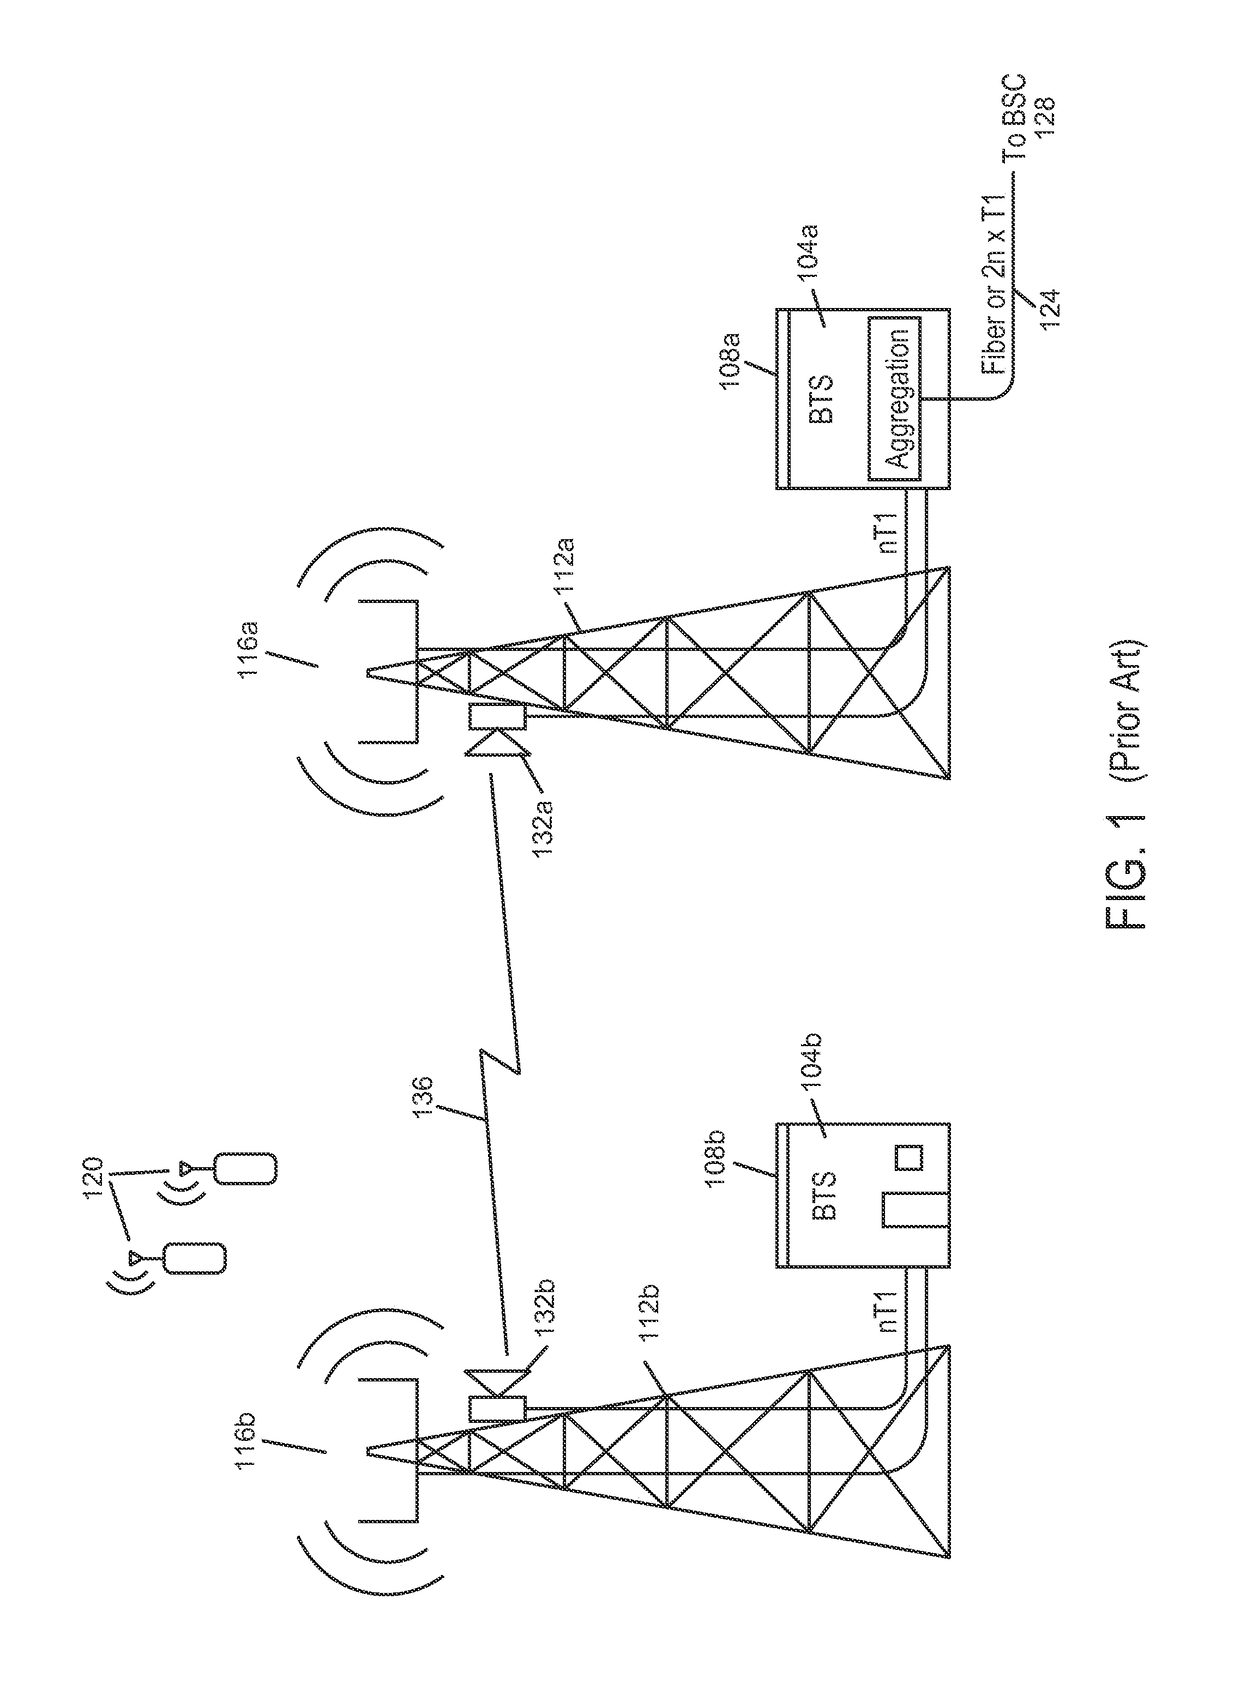 Radio with interference measurement during a blanking interval